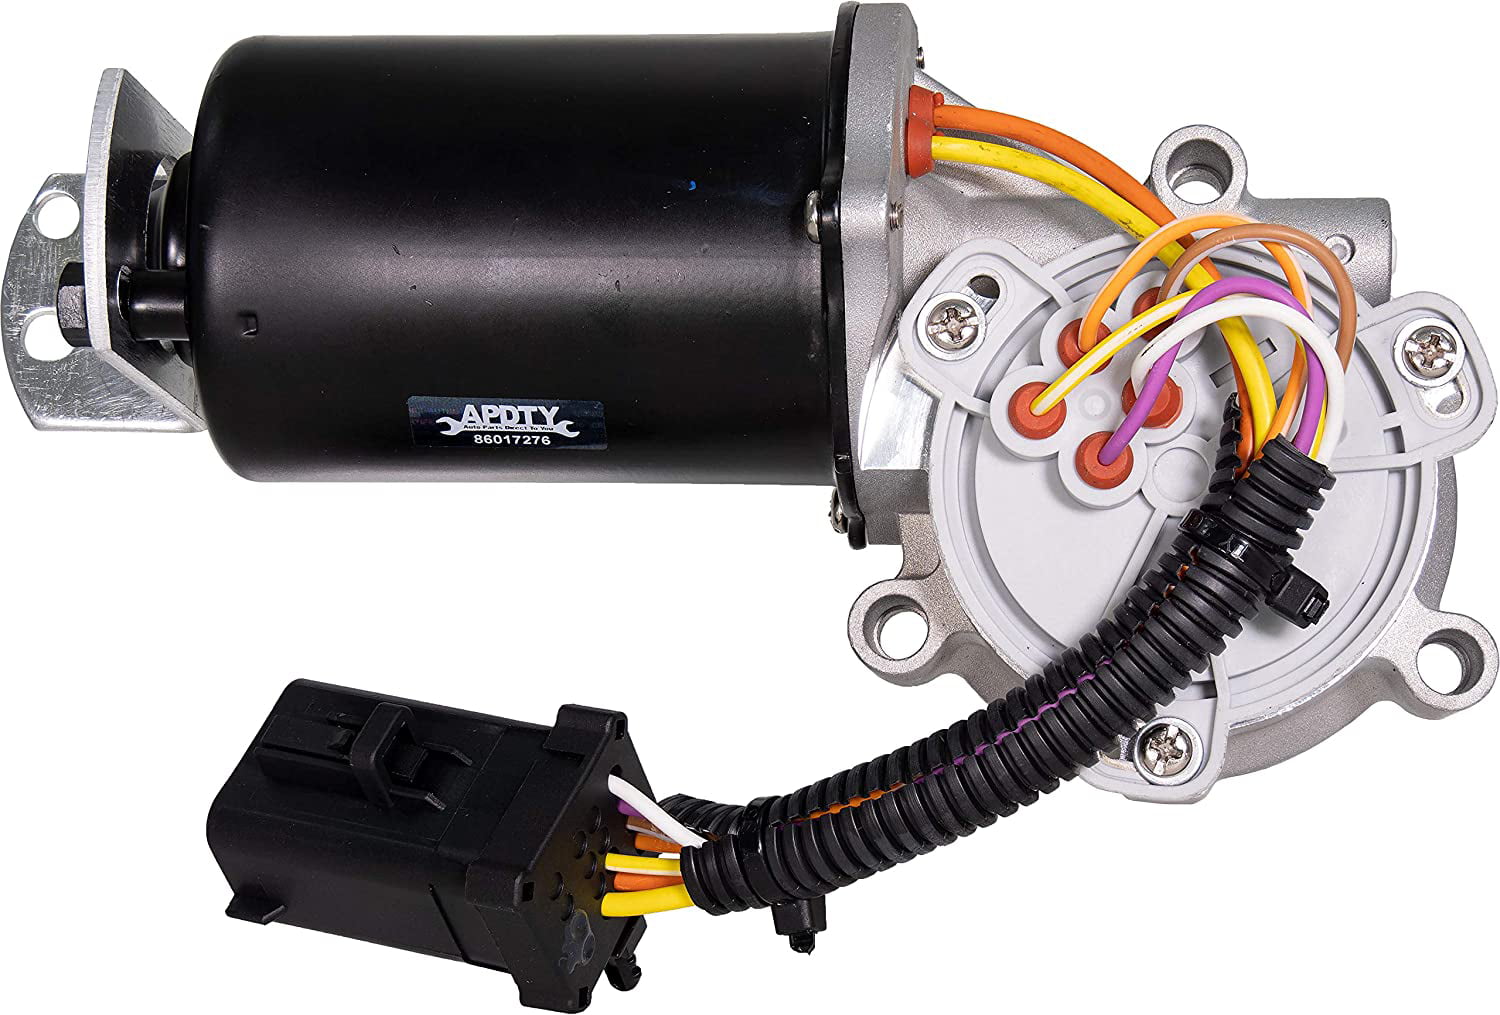 APDTY 711022 Transfer Case Shift Motor Fits 2004-2008 Ford F150 or Lincoln Mark LT 4-Wheel Drive 4WD Pickup Truck Replaces 4L3Z7G360BA, 5L3Z-7G360-A, 8L3Z7G360-A 